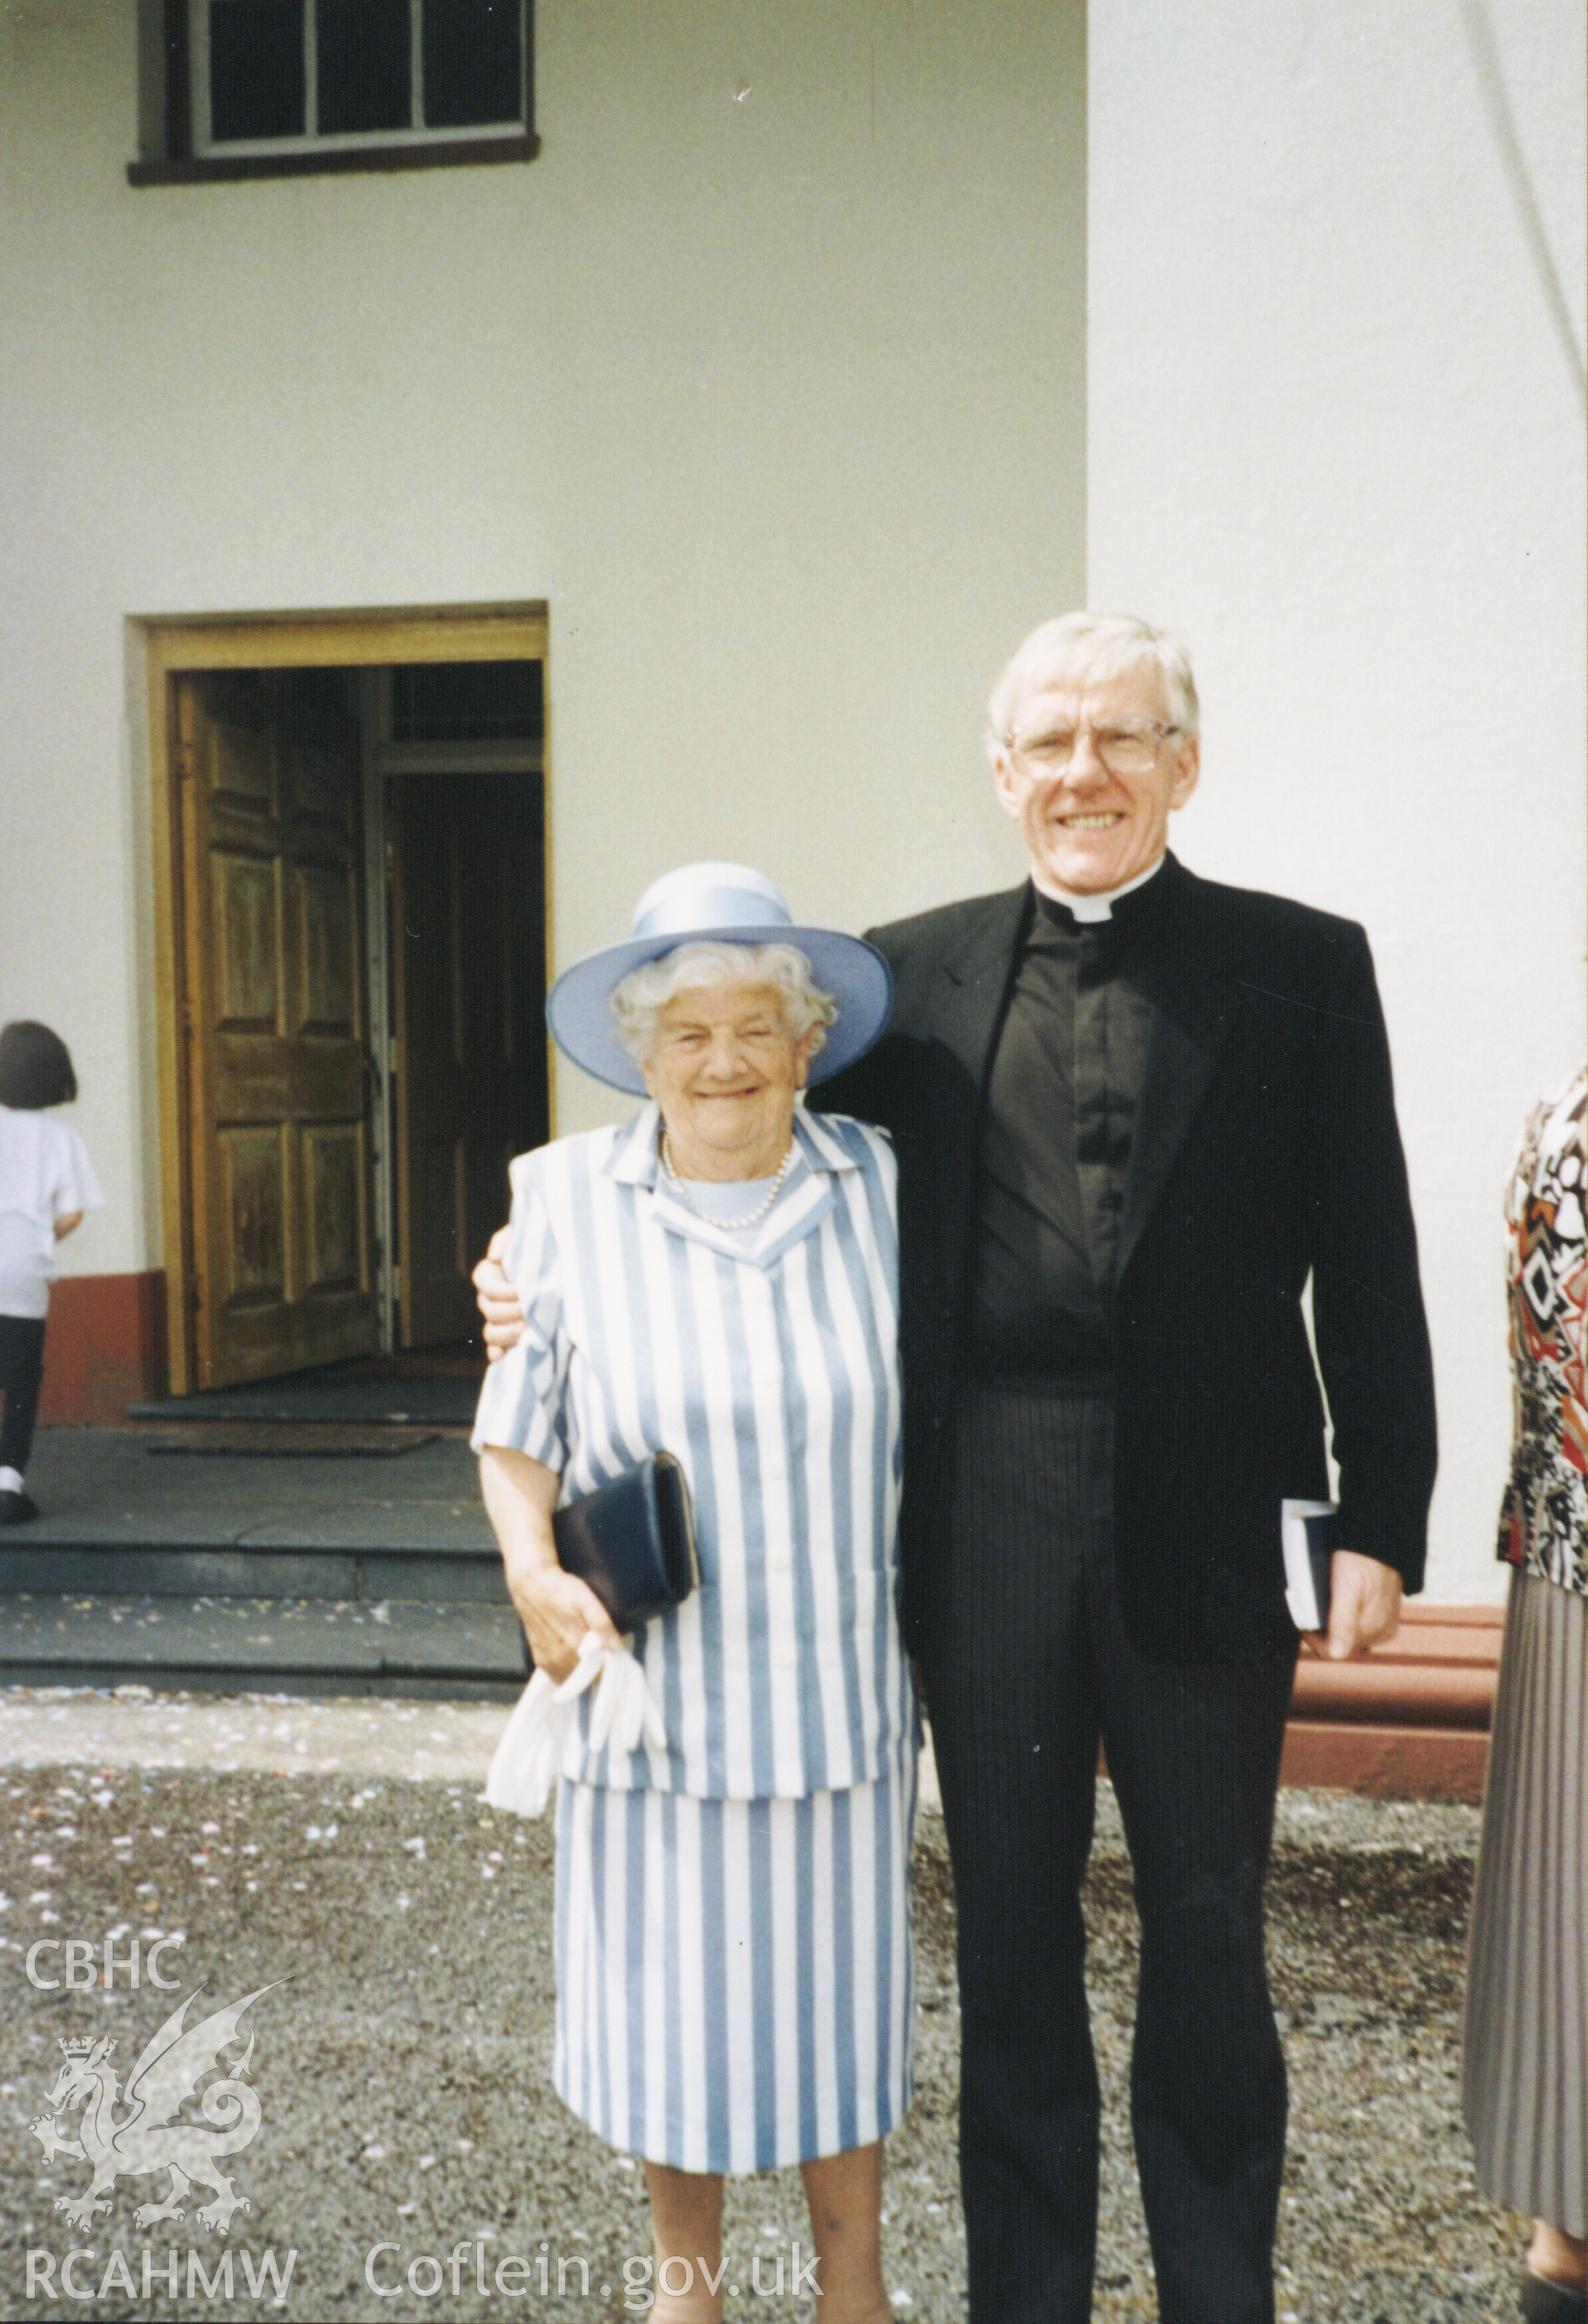 Colour photograph of Minister R. E. Hughes (ordained in 1989) and Miss Lena Jones in front of Peniel Chapel during a wedding. Catherine Jones in middle. Donated as part of the Digital Dissent Project.